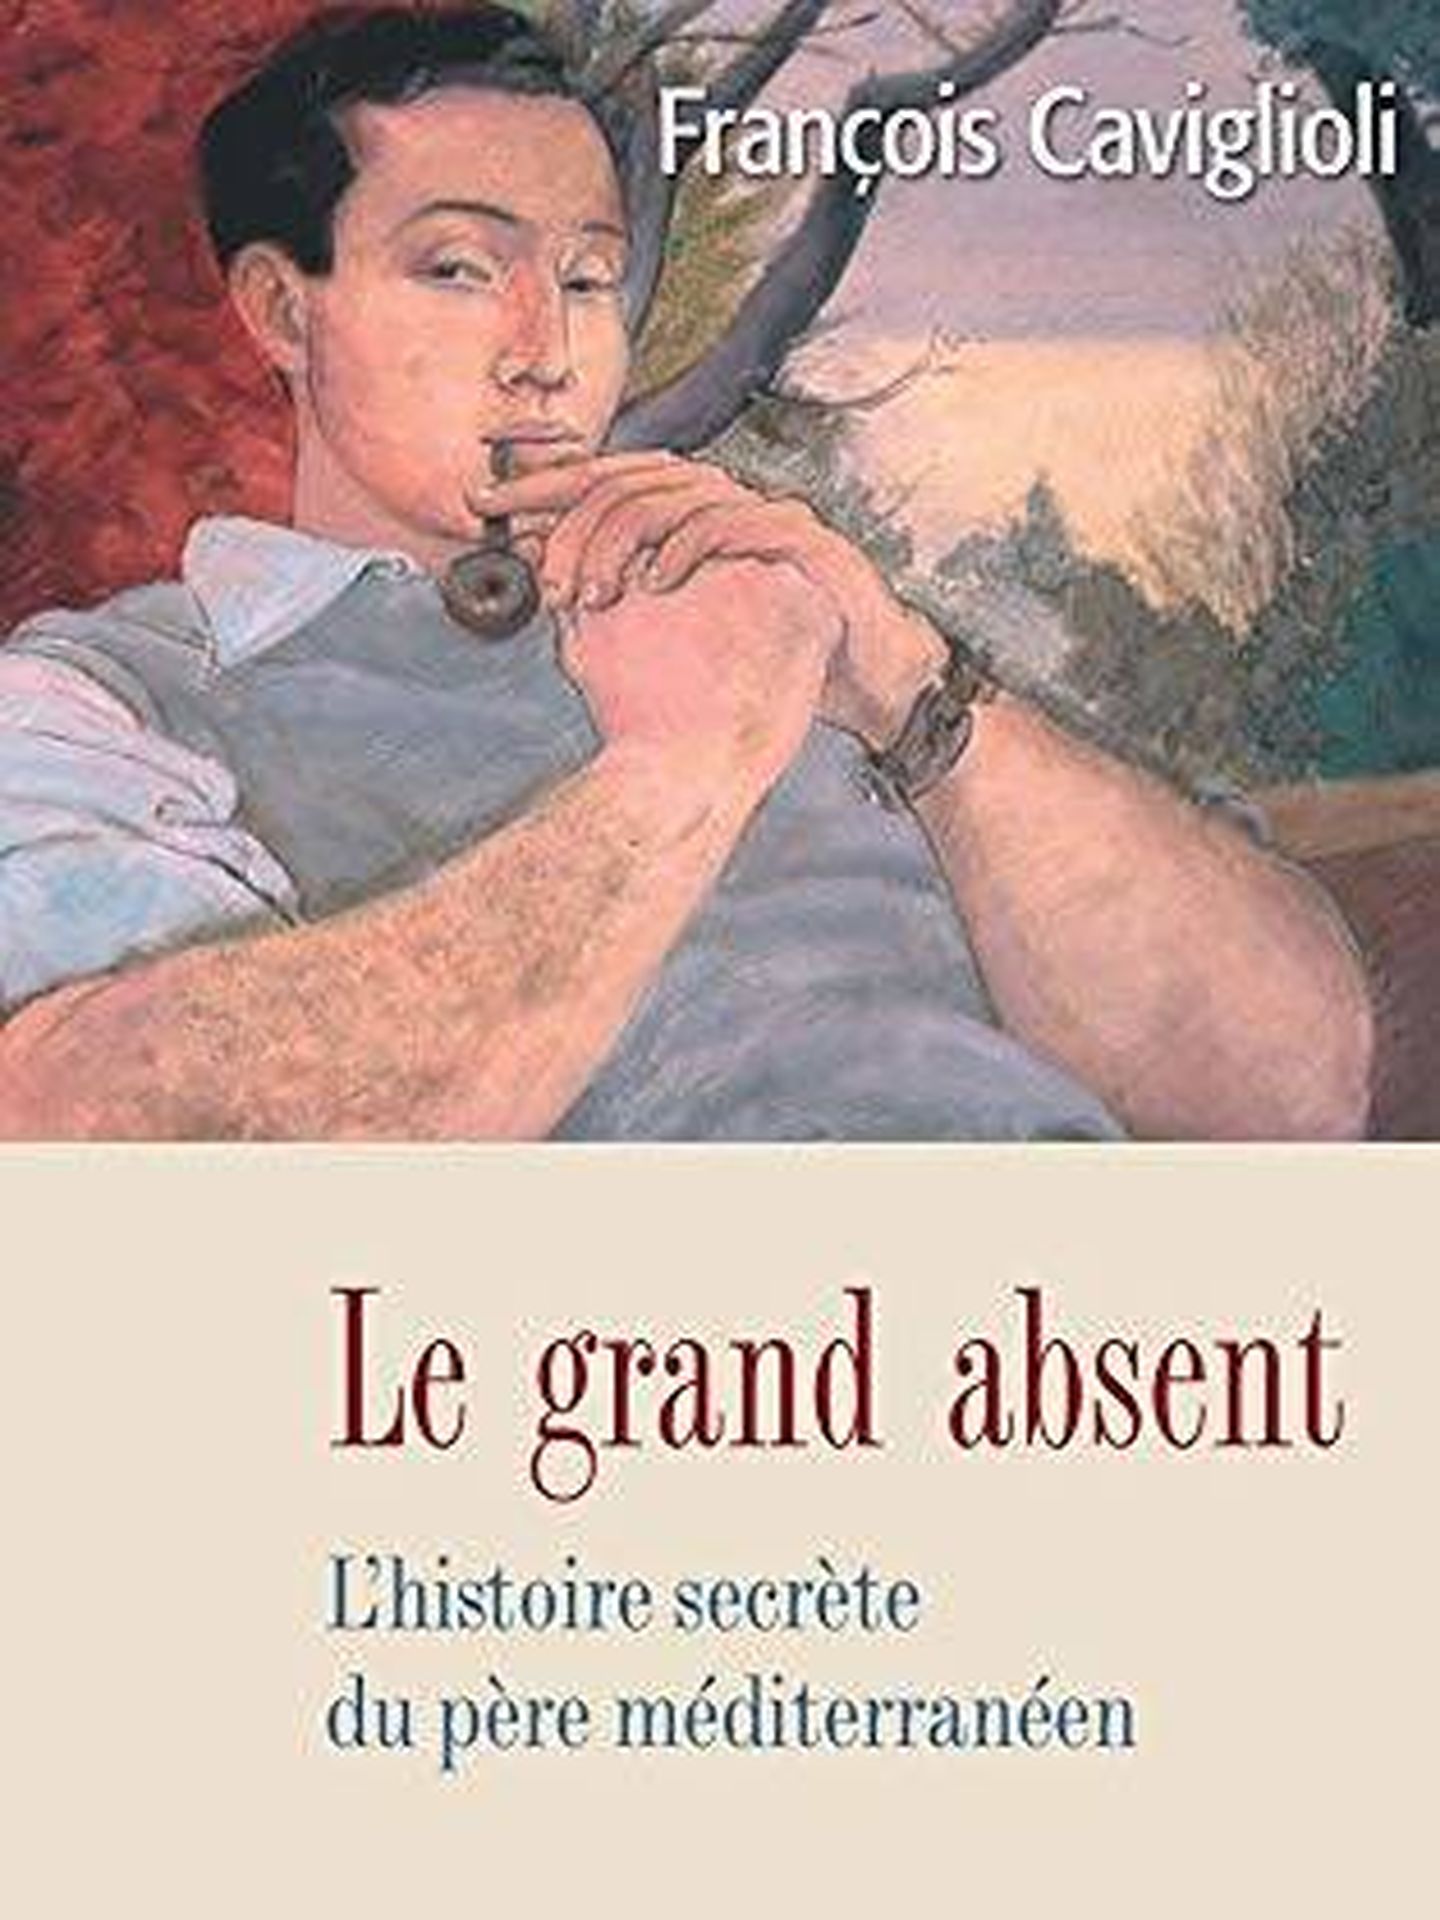  'Le grand absent'.